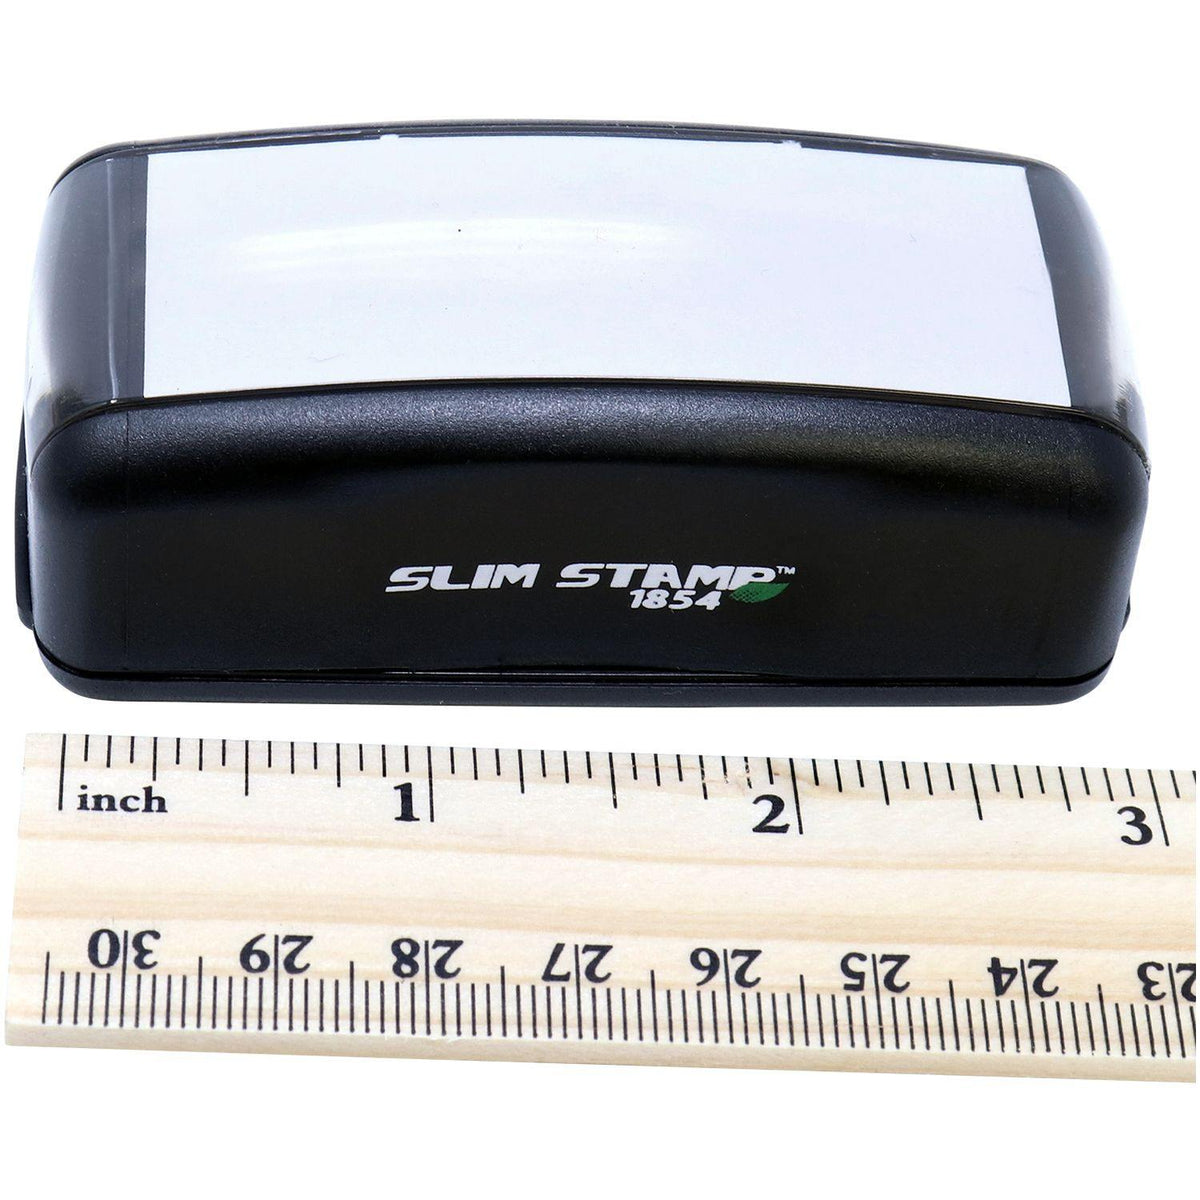 Measurement Large Pre-Inked Non-Smoker Stamp with Ruler